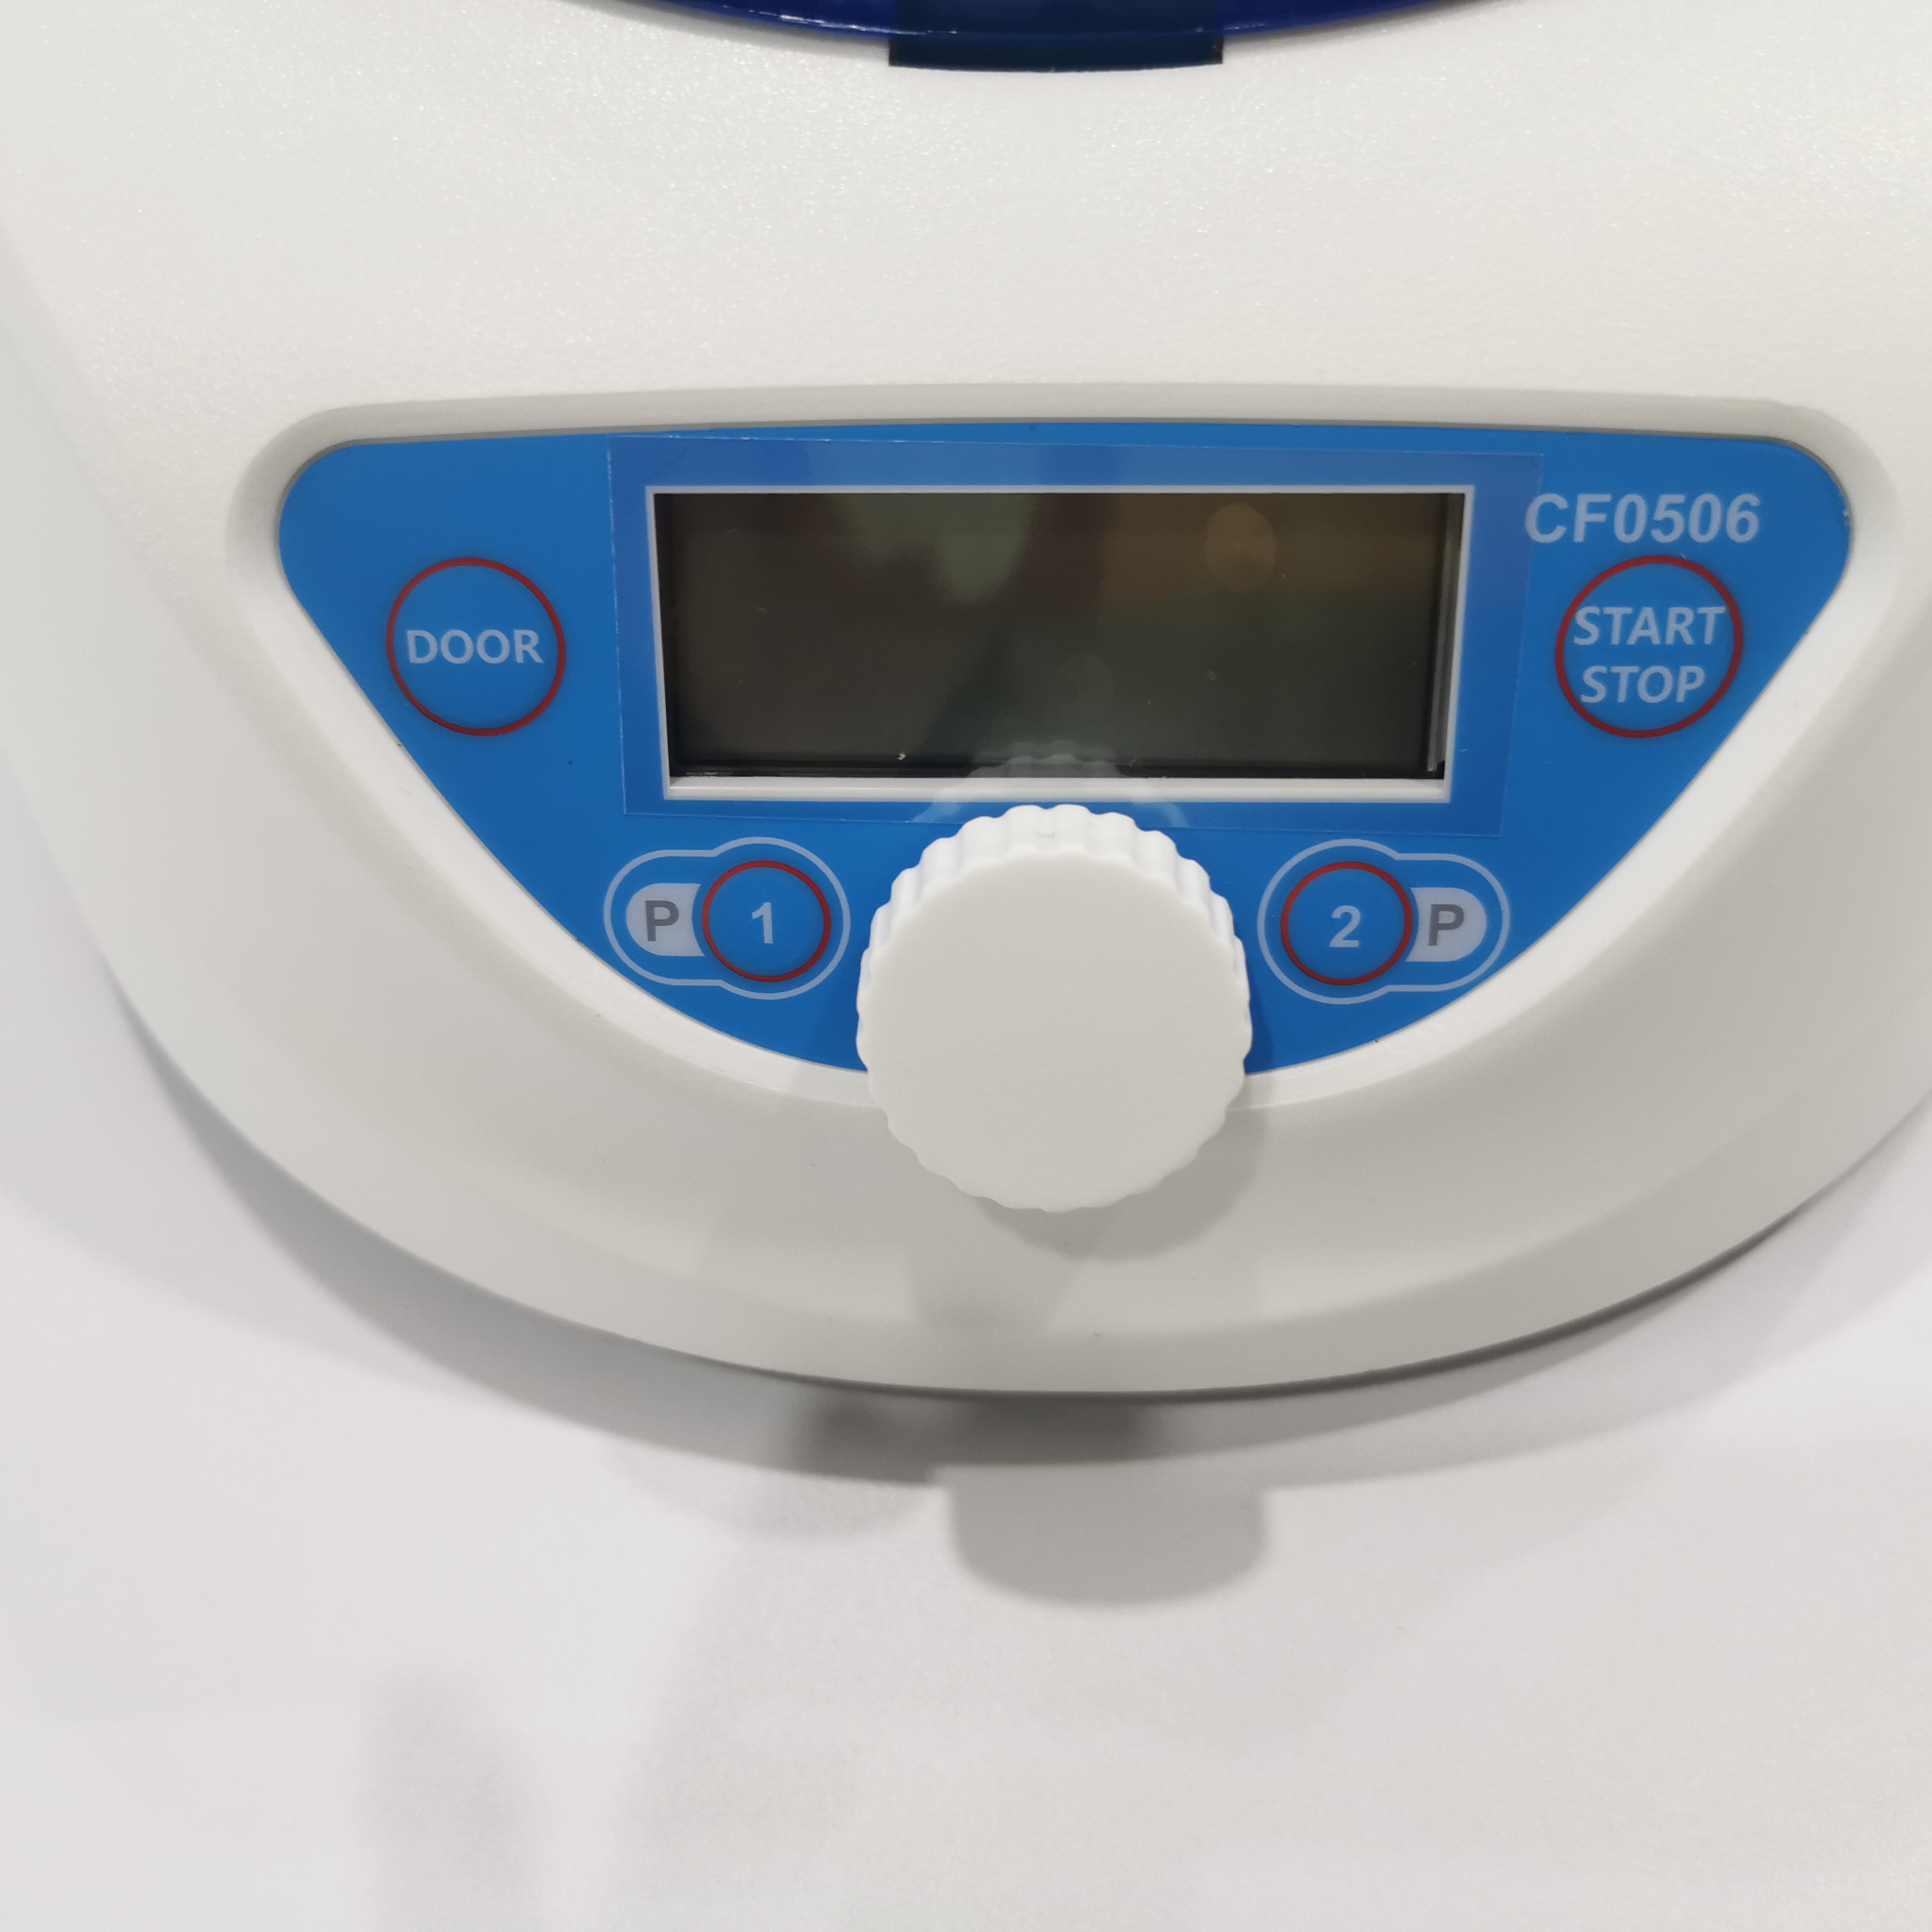 NADE Lab Low-speed Centrifuge with fixed angle rotor CF0506 widely used for blood or urine separation